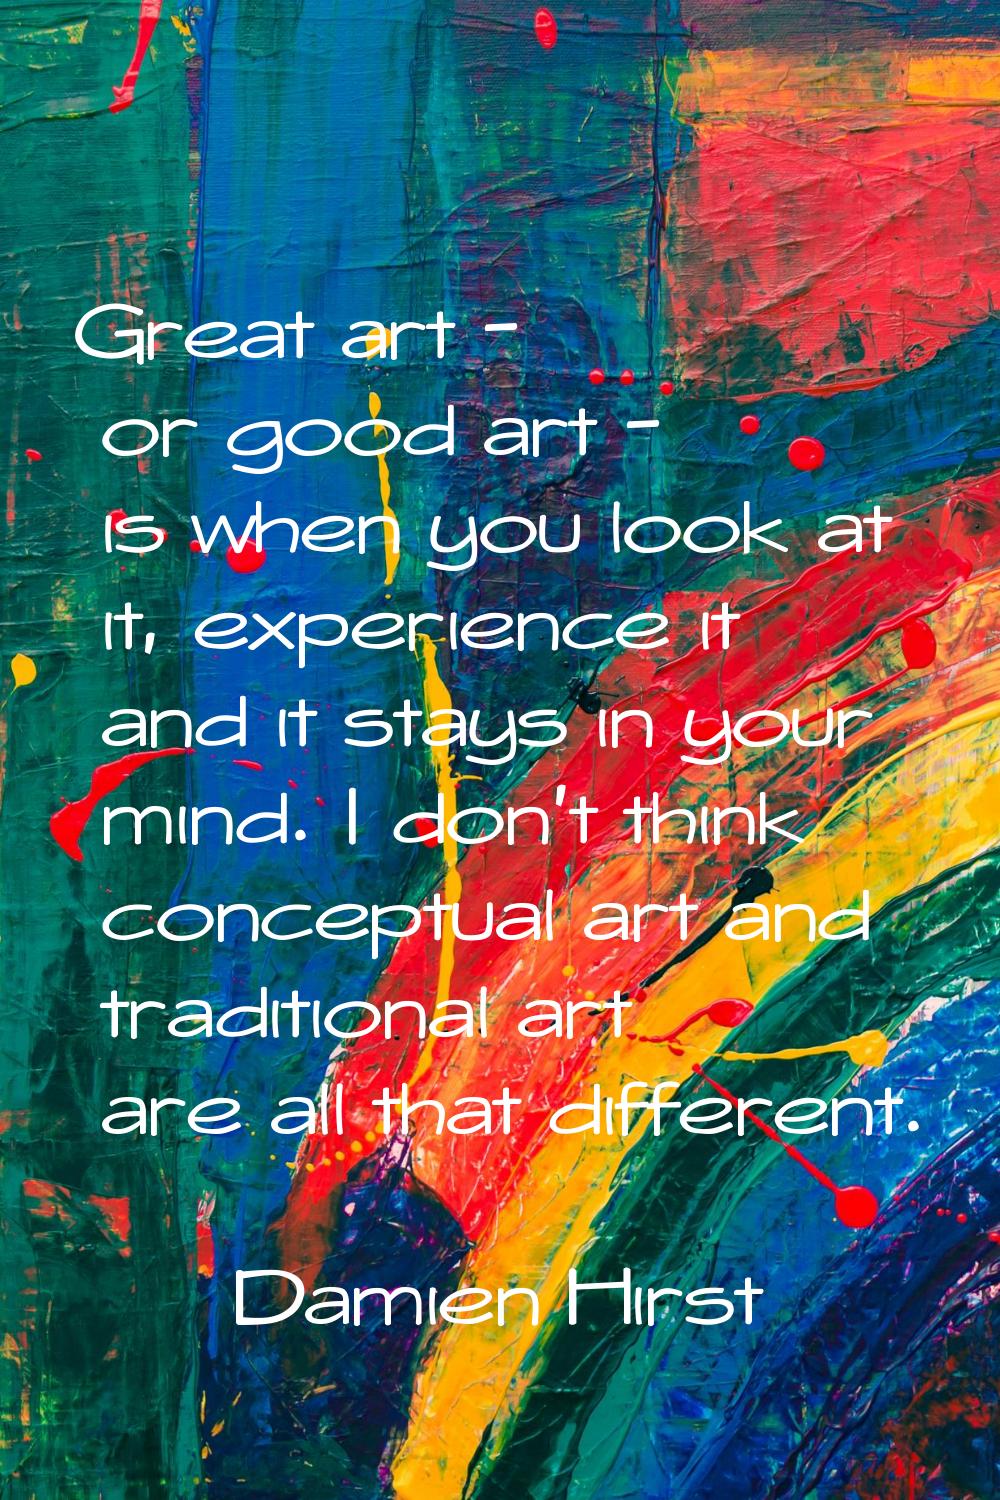 Great art - or good art - is when you look at it, experience it and it stays in your mind. I don't 